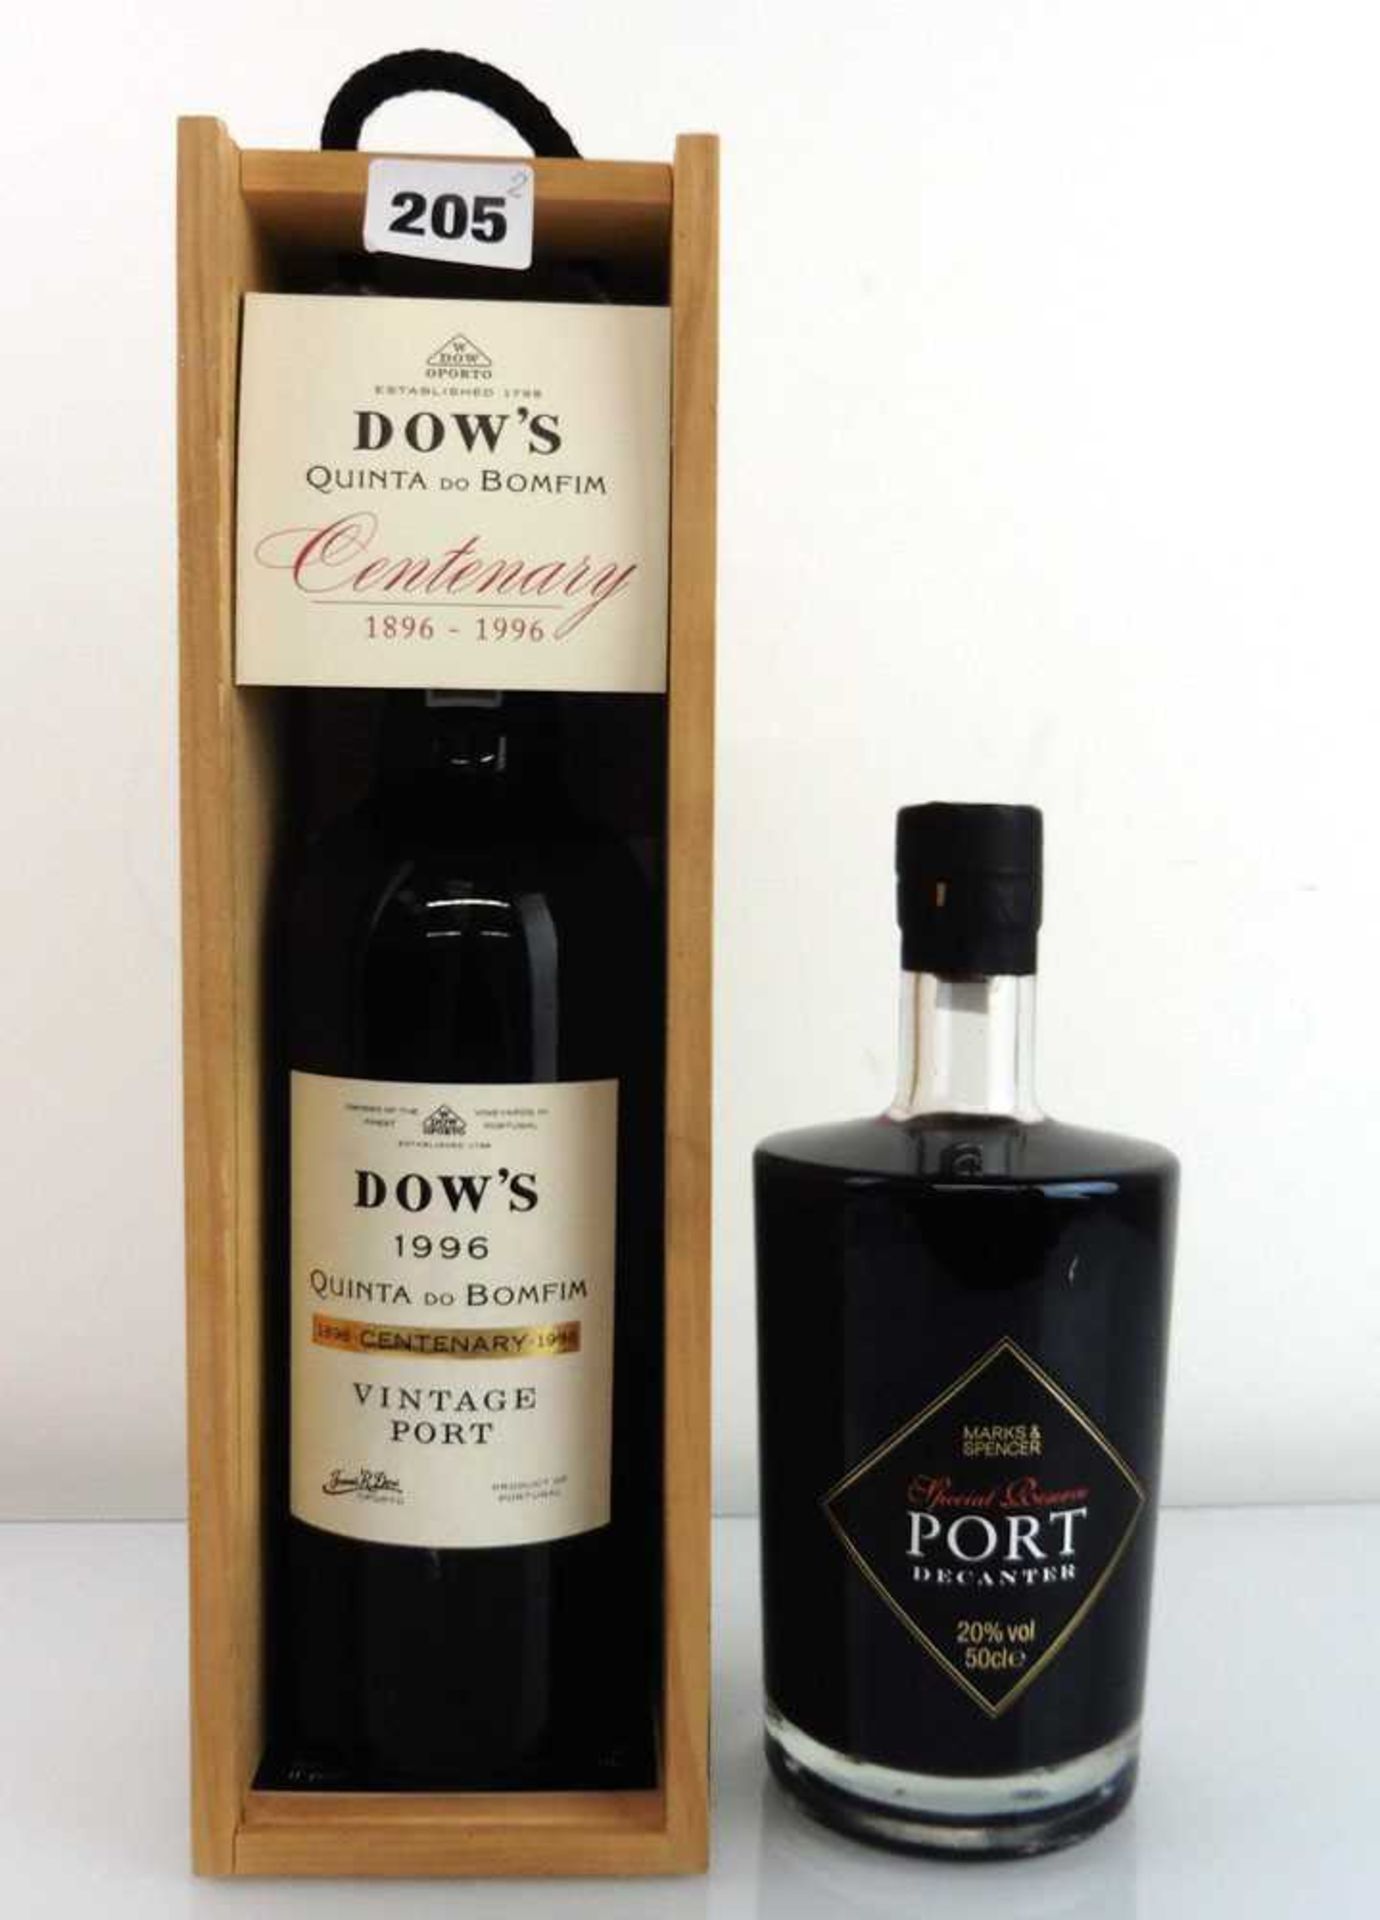 2 bottles, 1x Dow's Quinta do Bomfim Centenary 1996 Vintage Port with own wooden box & 1x M&S